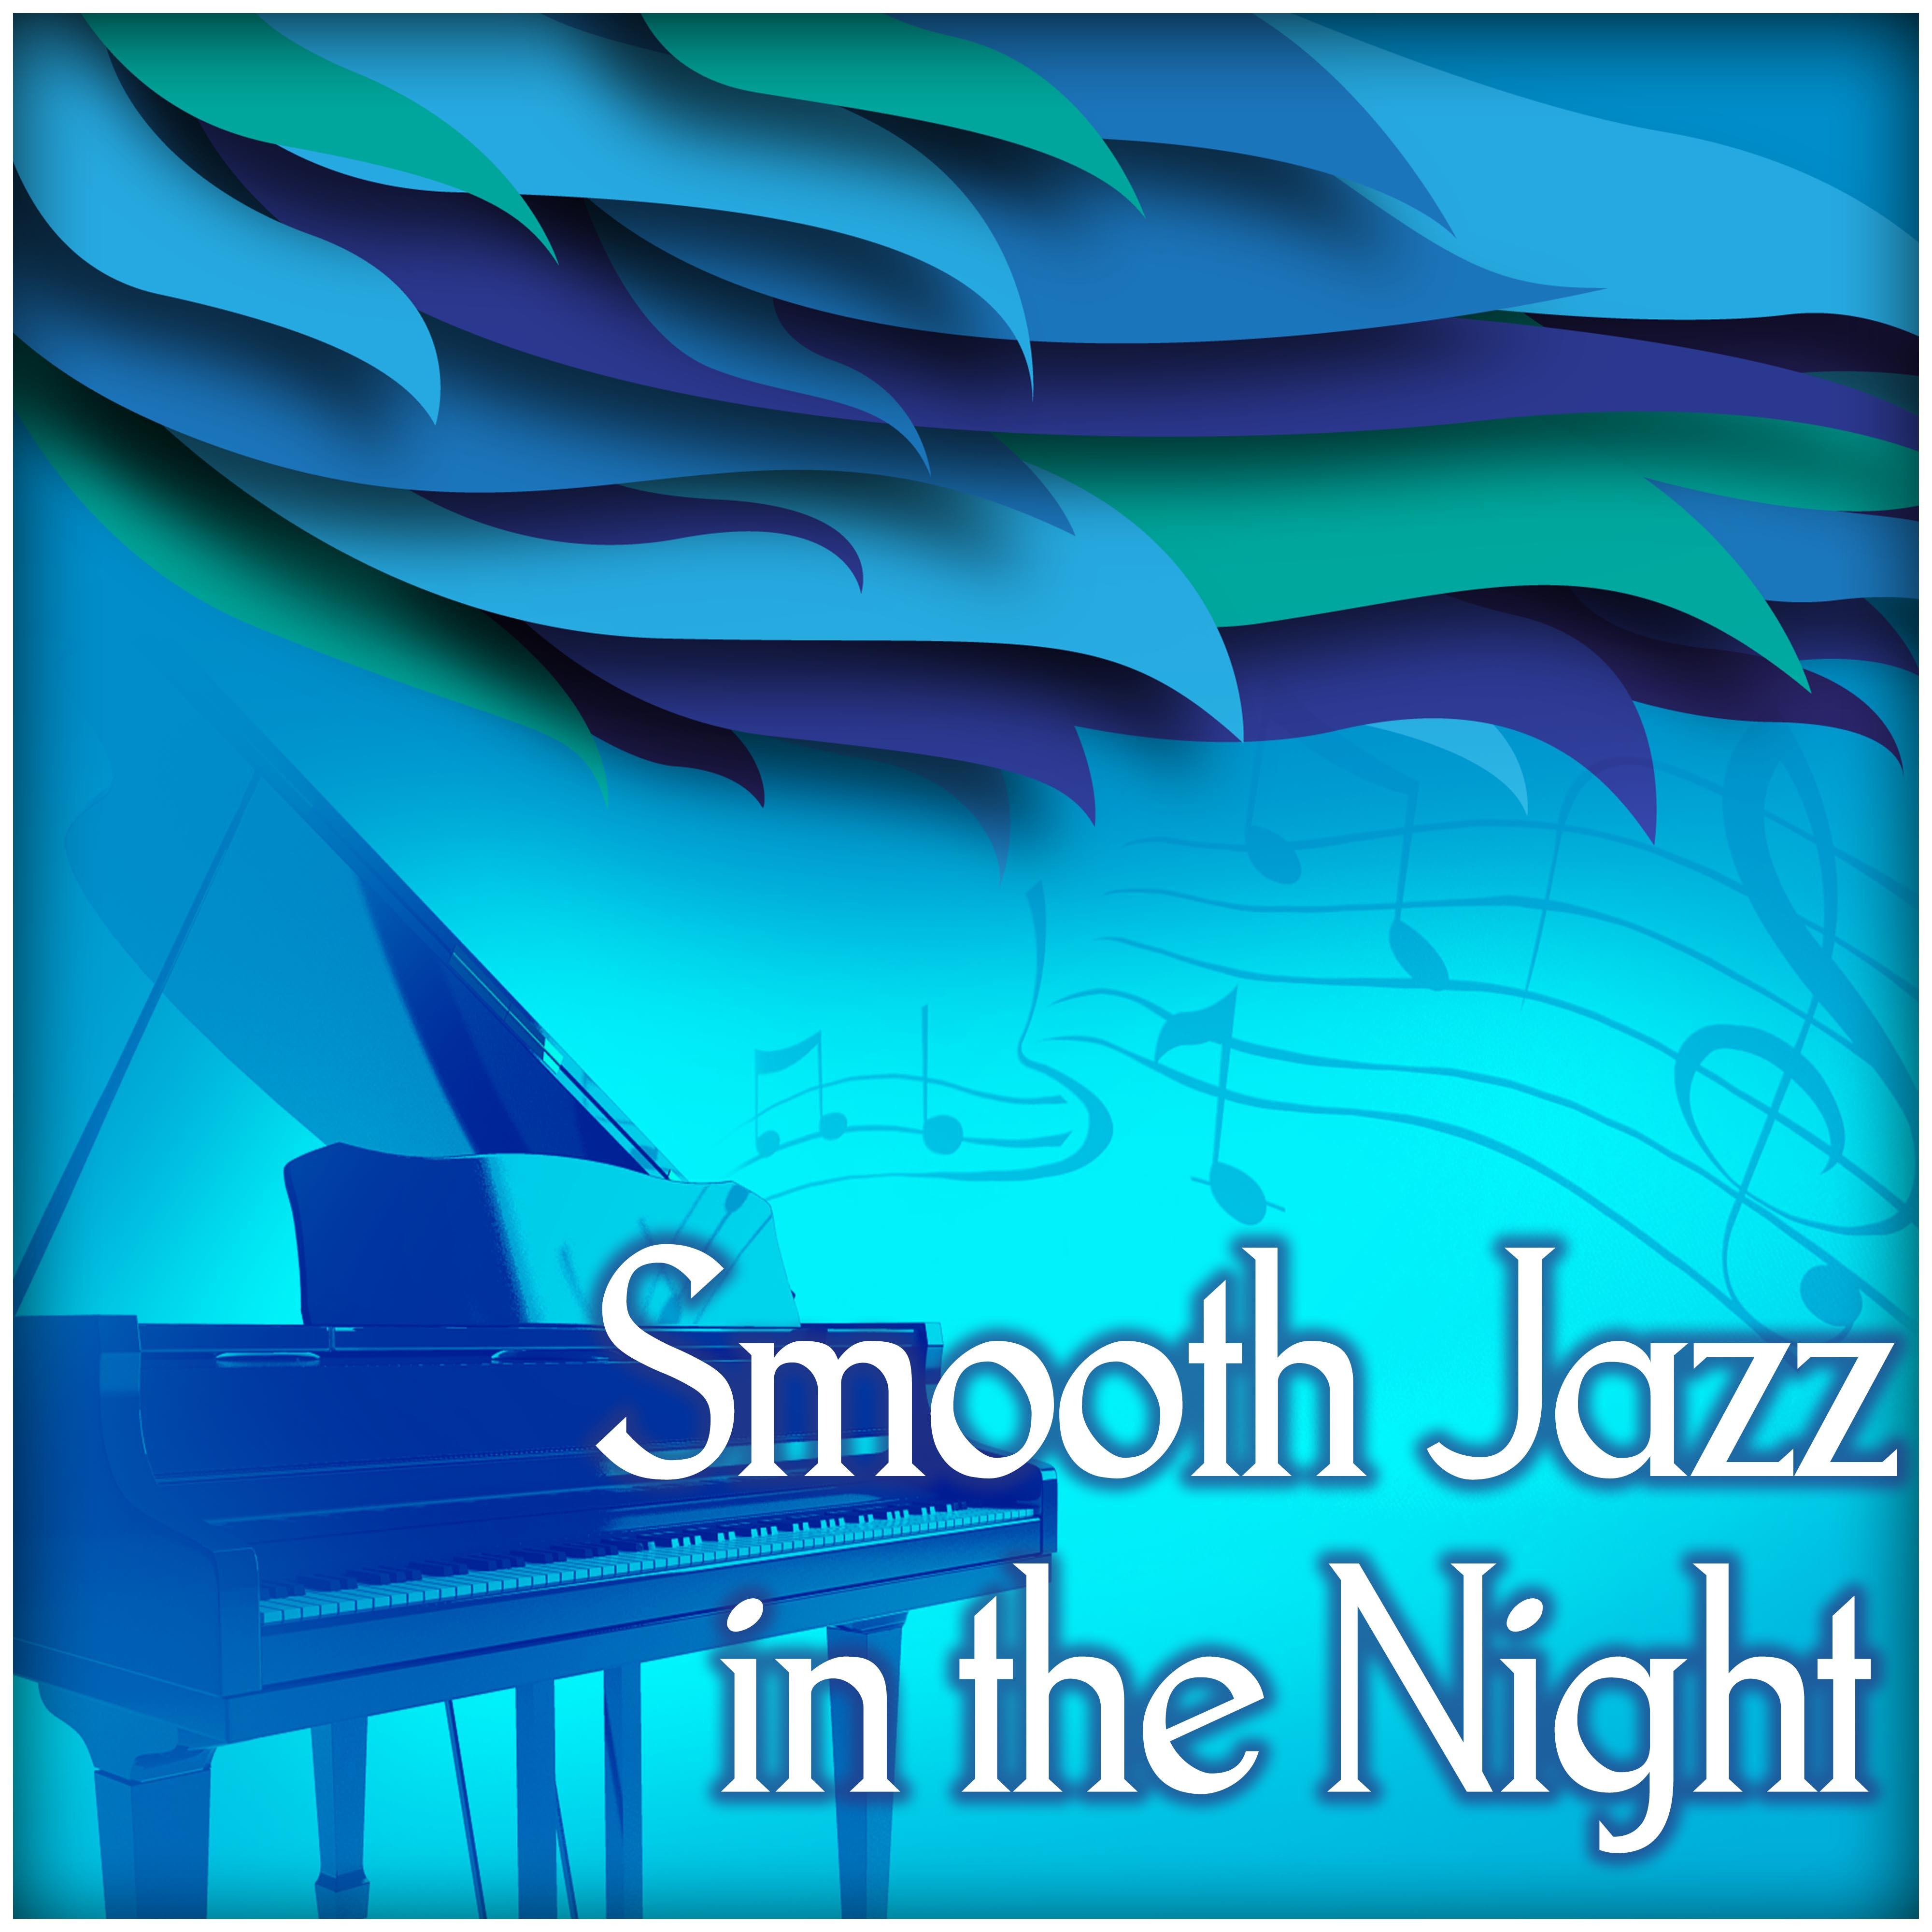 Smooth Jazz in the Night  Soft  Calm Piano Jazz, Blue Jazz, Easy Listening, Background Piano Music